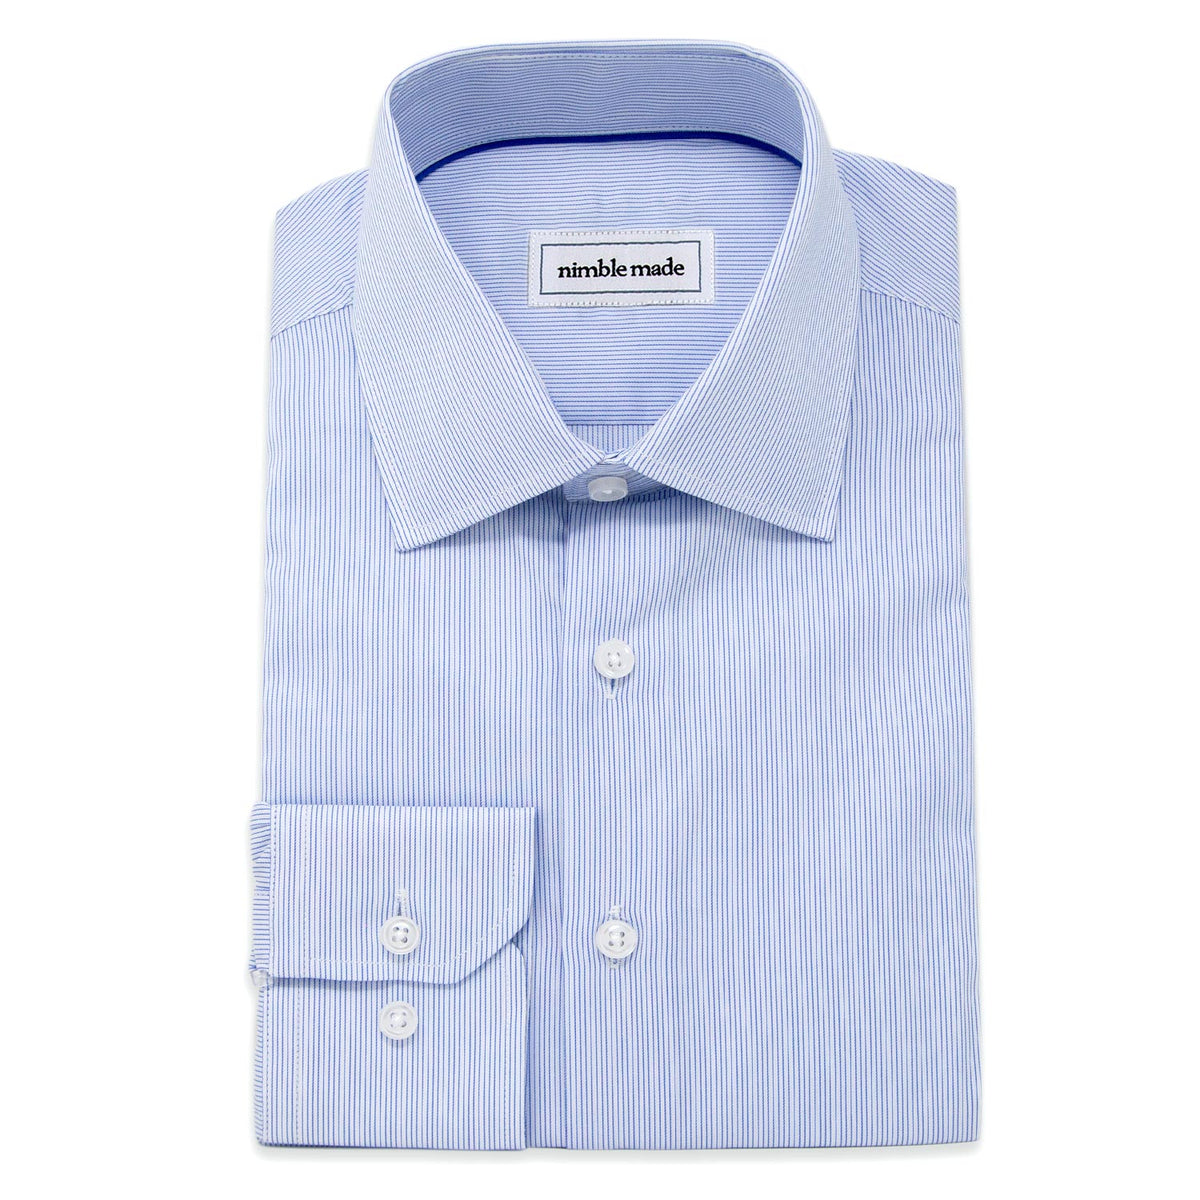 Men's White and Blue Striped Dress Shirt | The Grand Canal - Nimble Made